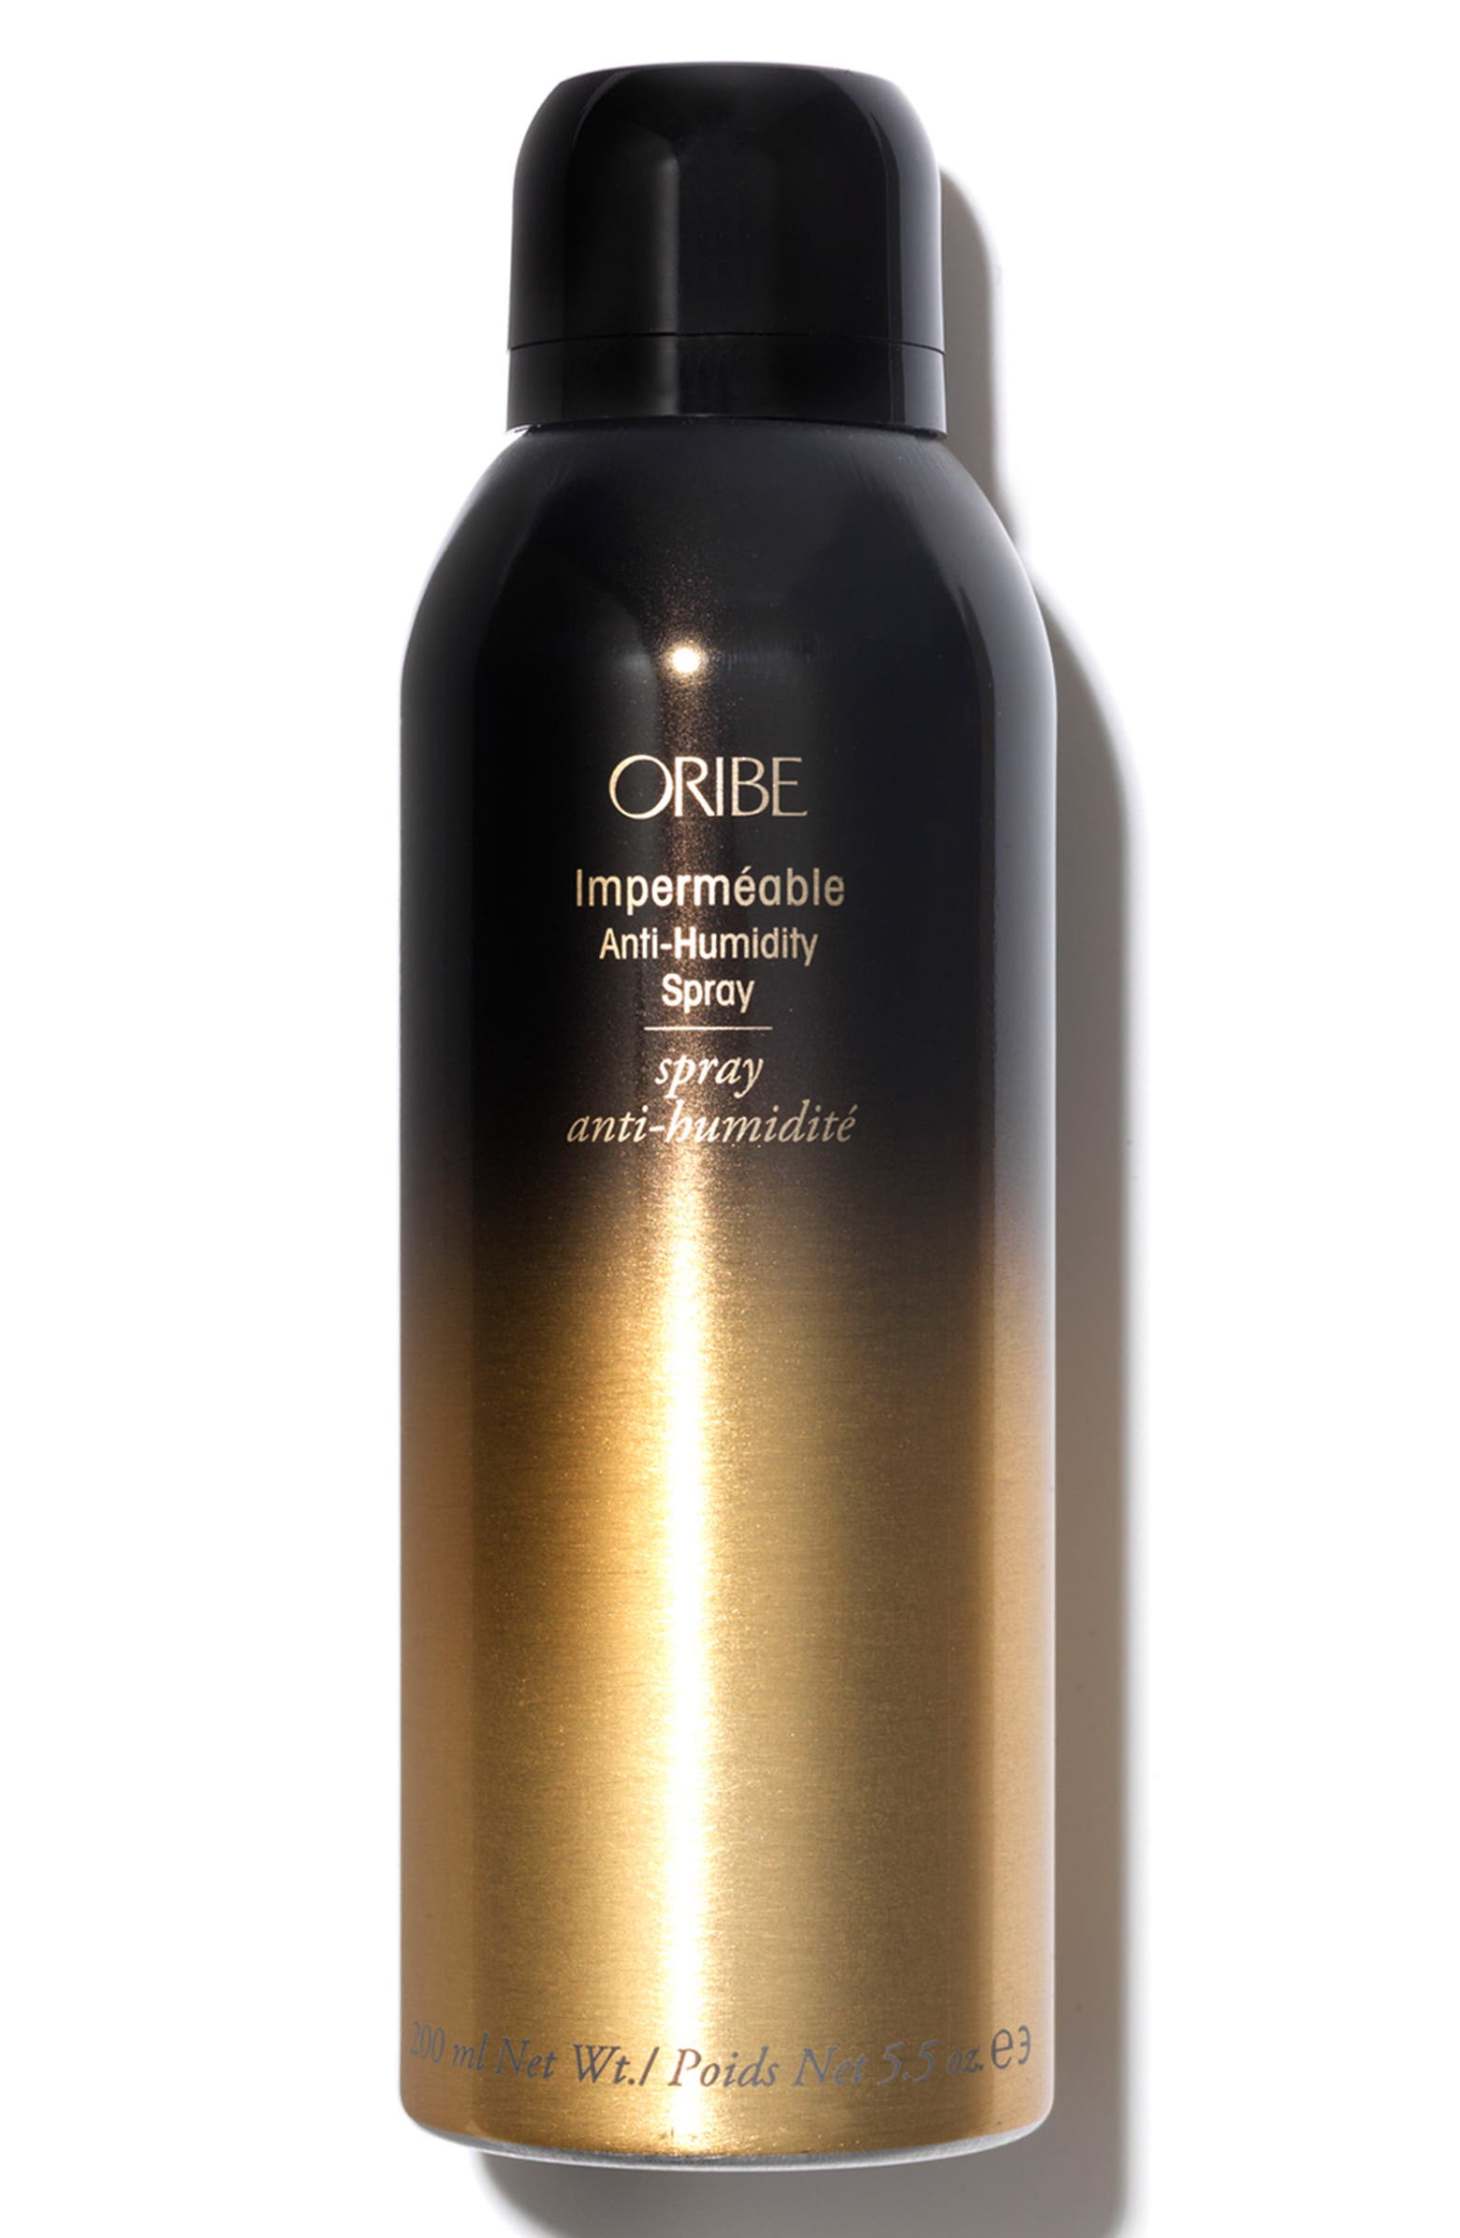 Oribe Imperméable Anti-Humid Spray for curls